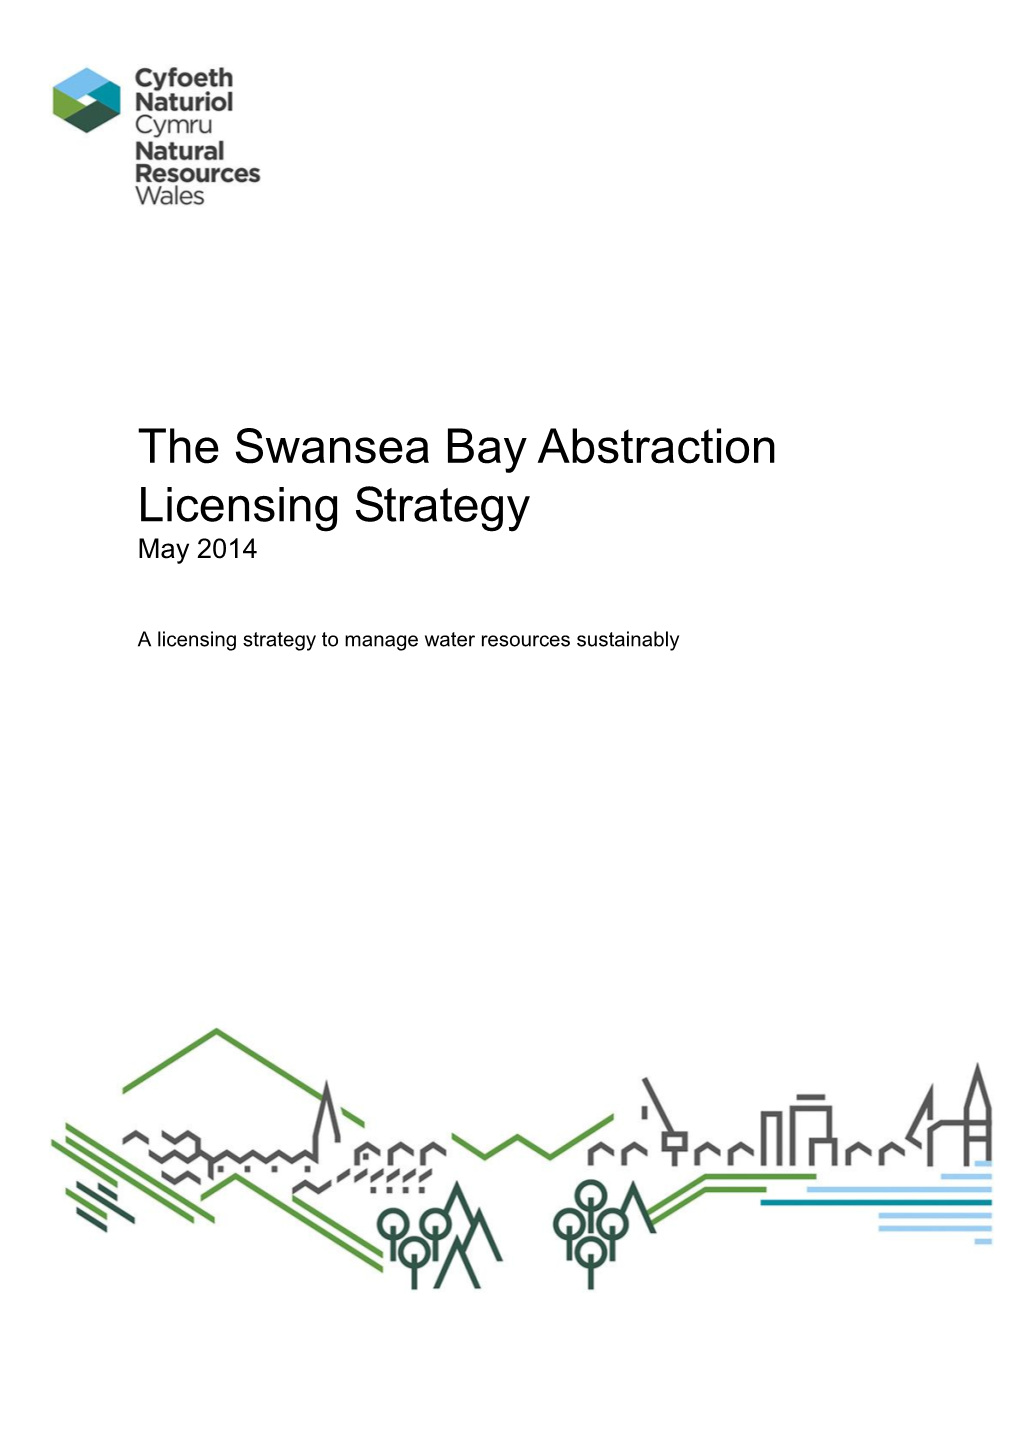 The Swansea Bay Abstraction Licensing Strategy May 2014